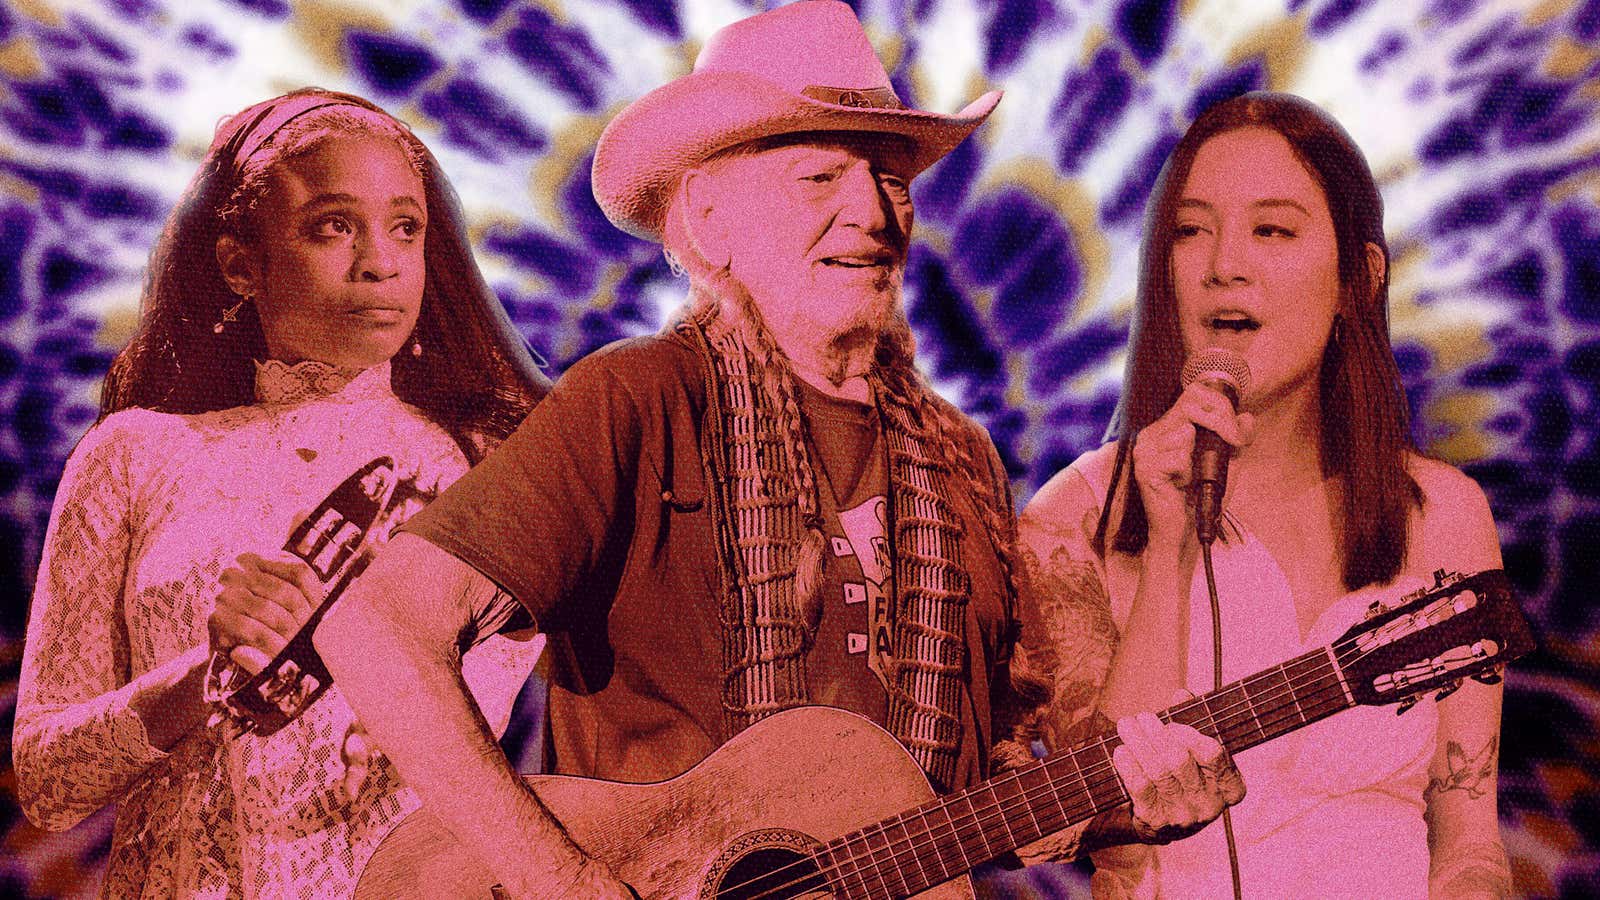 From left: Adia Victoria (Photo: Erika Goldring/Getty Images), Willie Nelson (Photo: Gary Miller/Getty Images for Shock Ink), Michelle Zauner (Photo: Rick Kern/Getty Images)